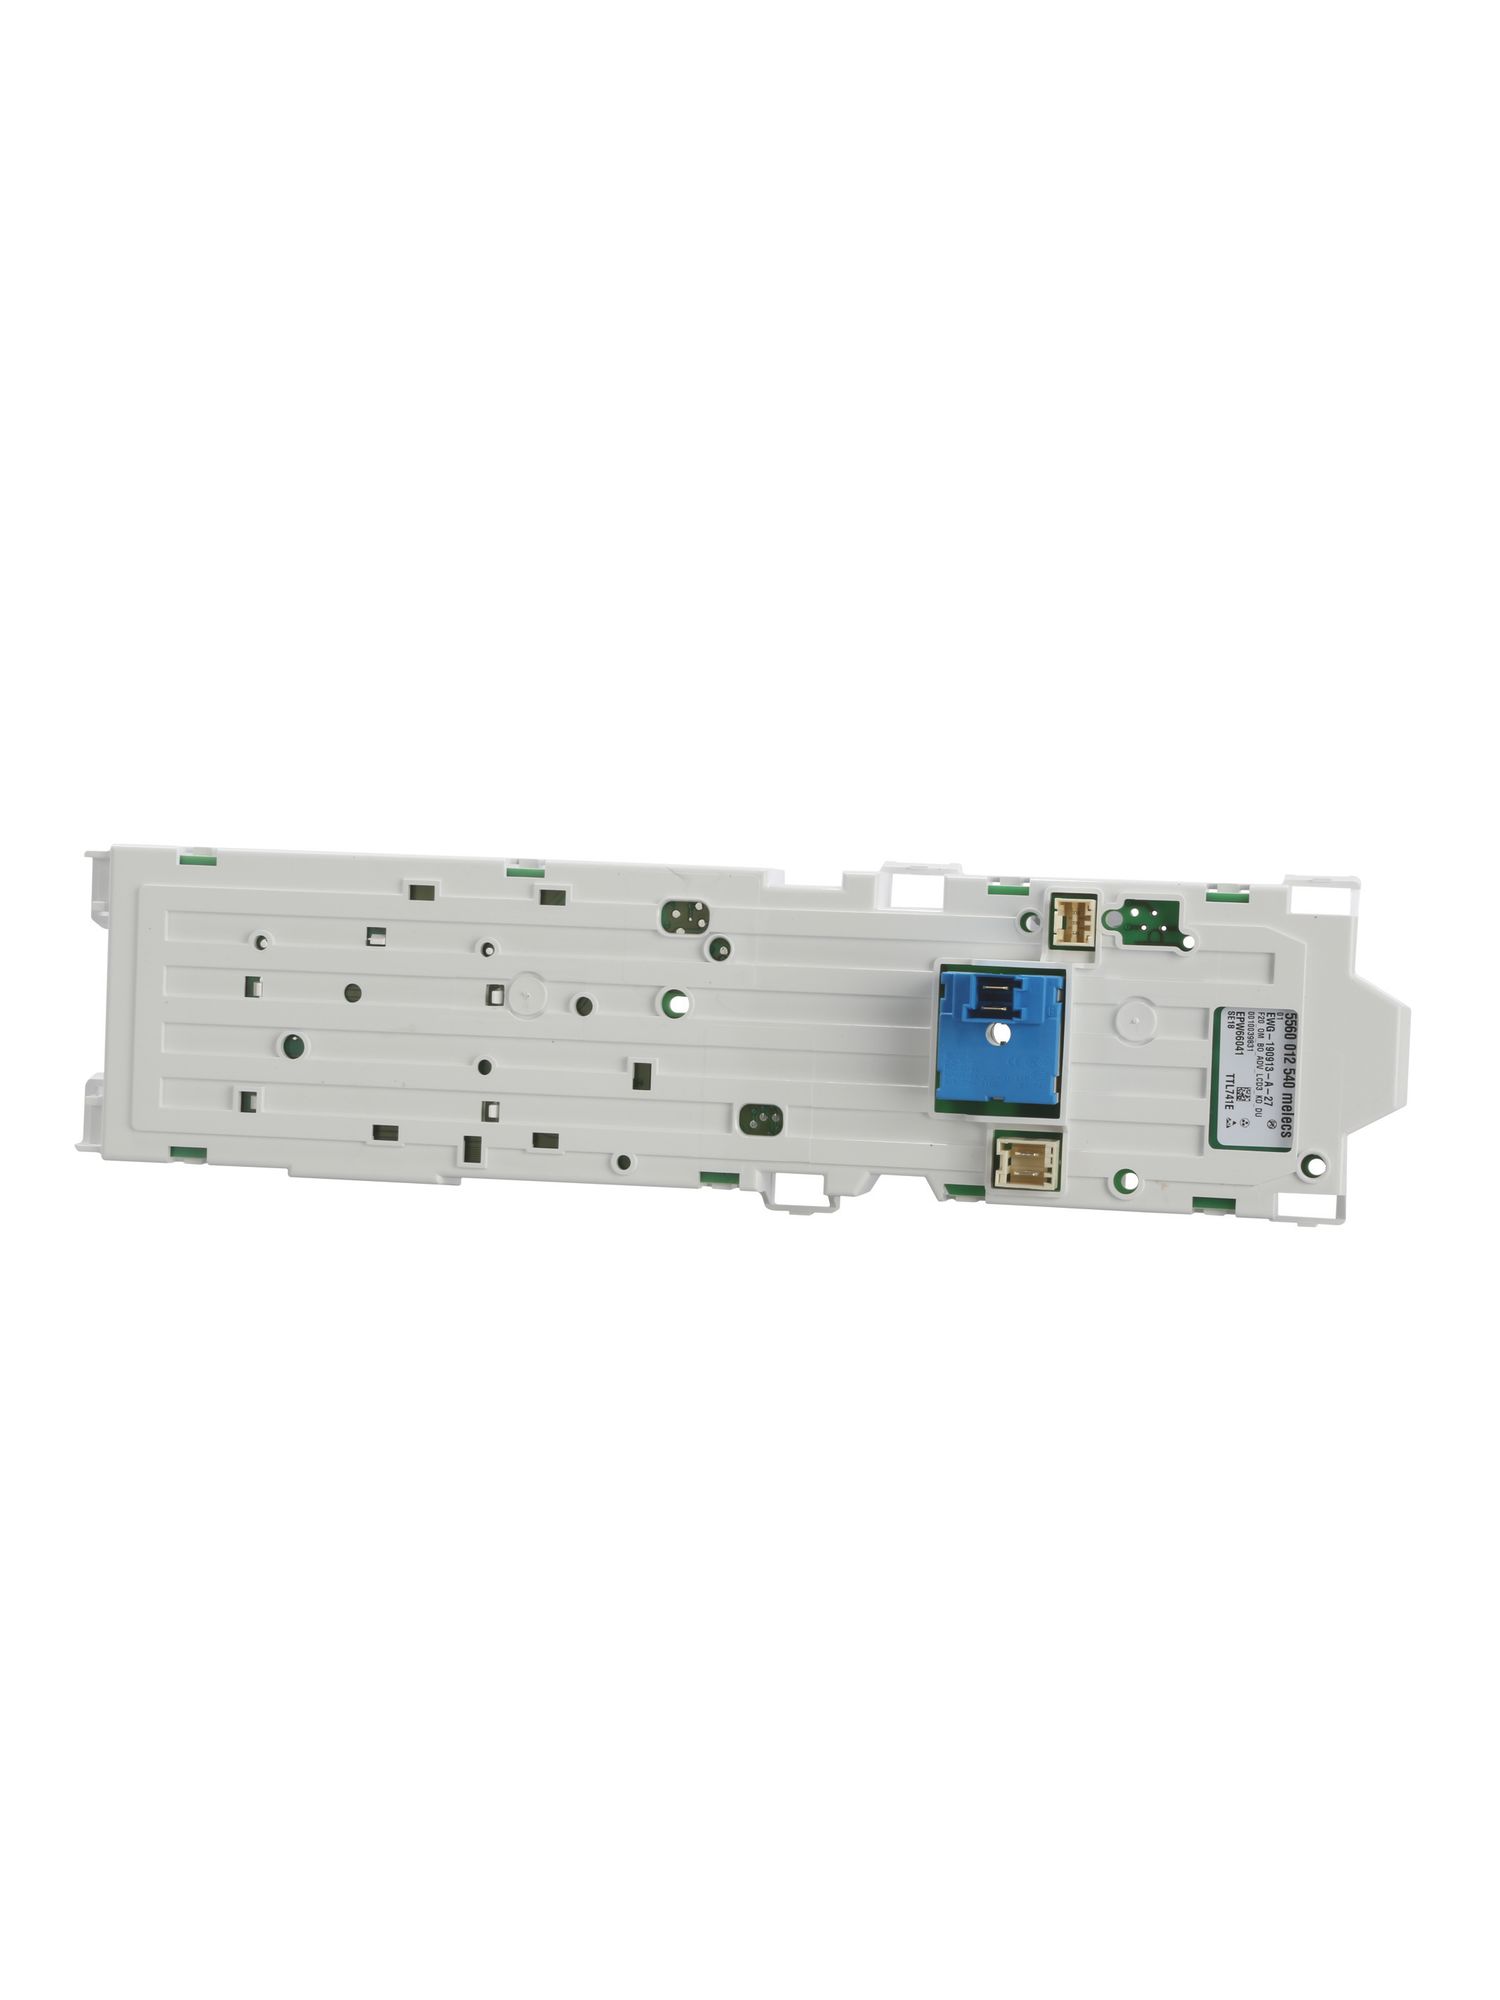 Bedienmodul BO F20A I-DOS UP 2 4 (BD-00742746)